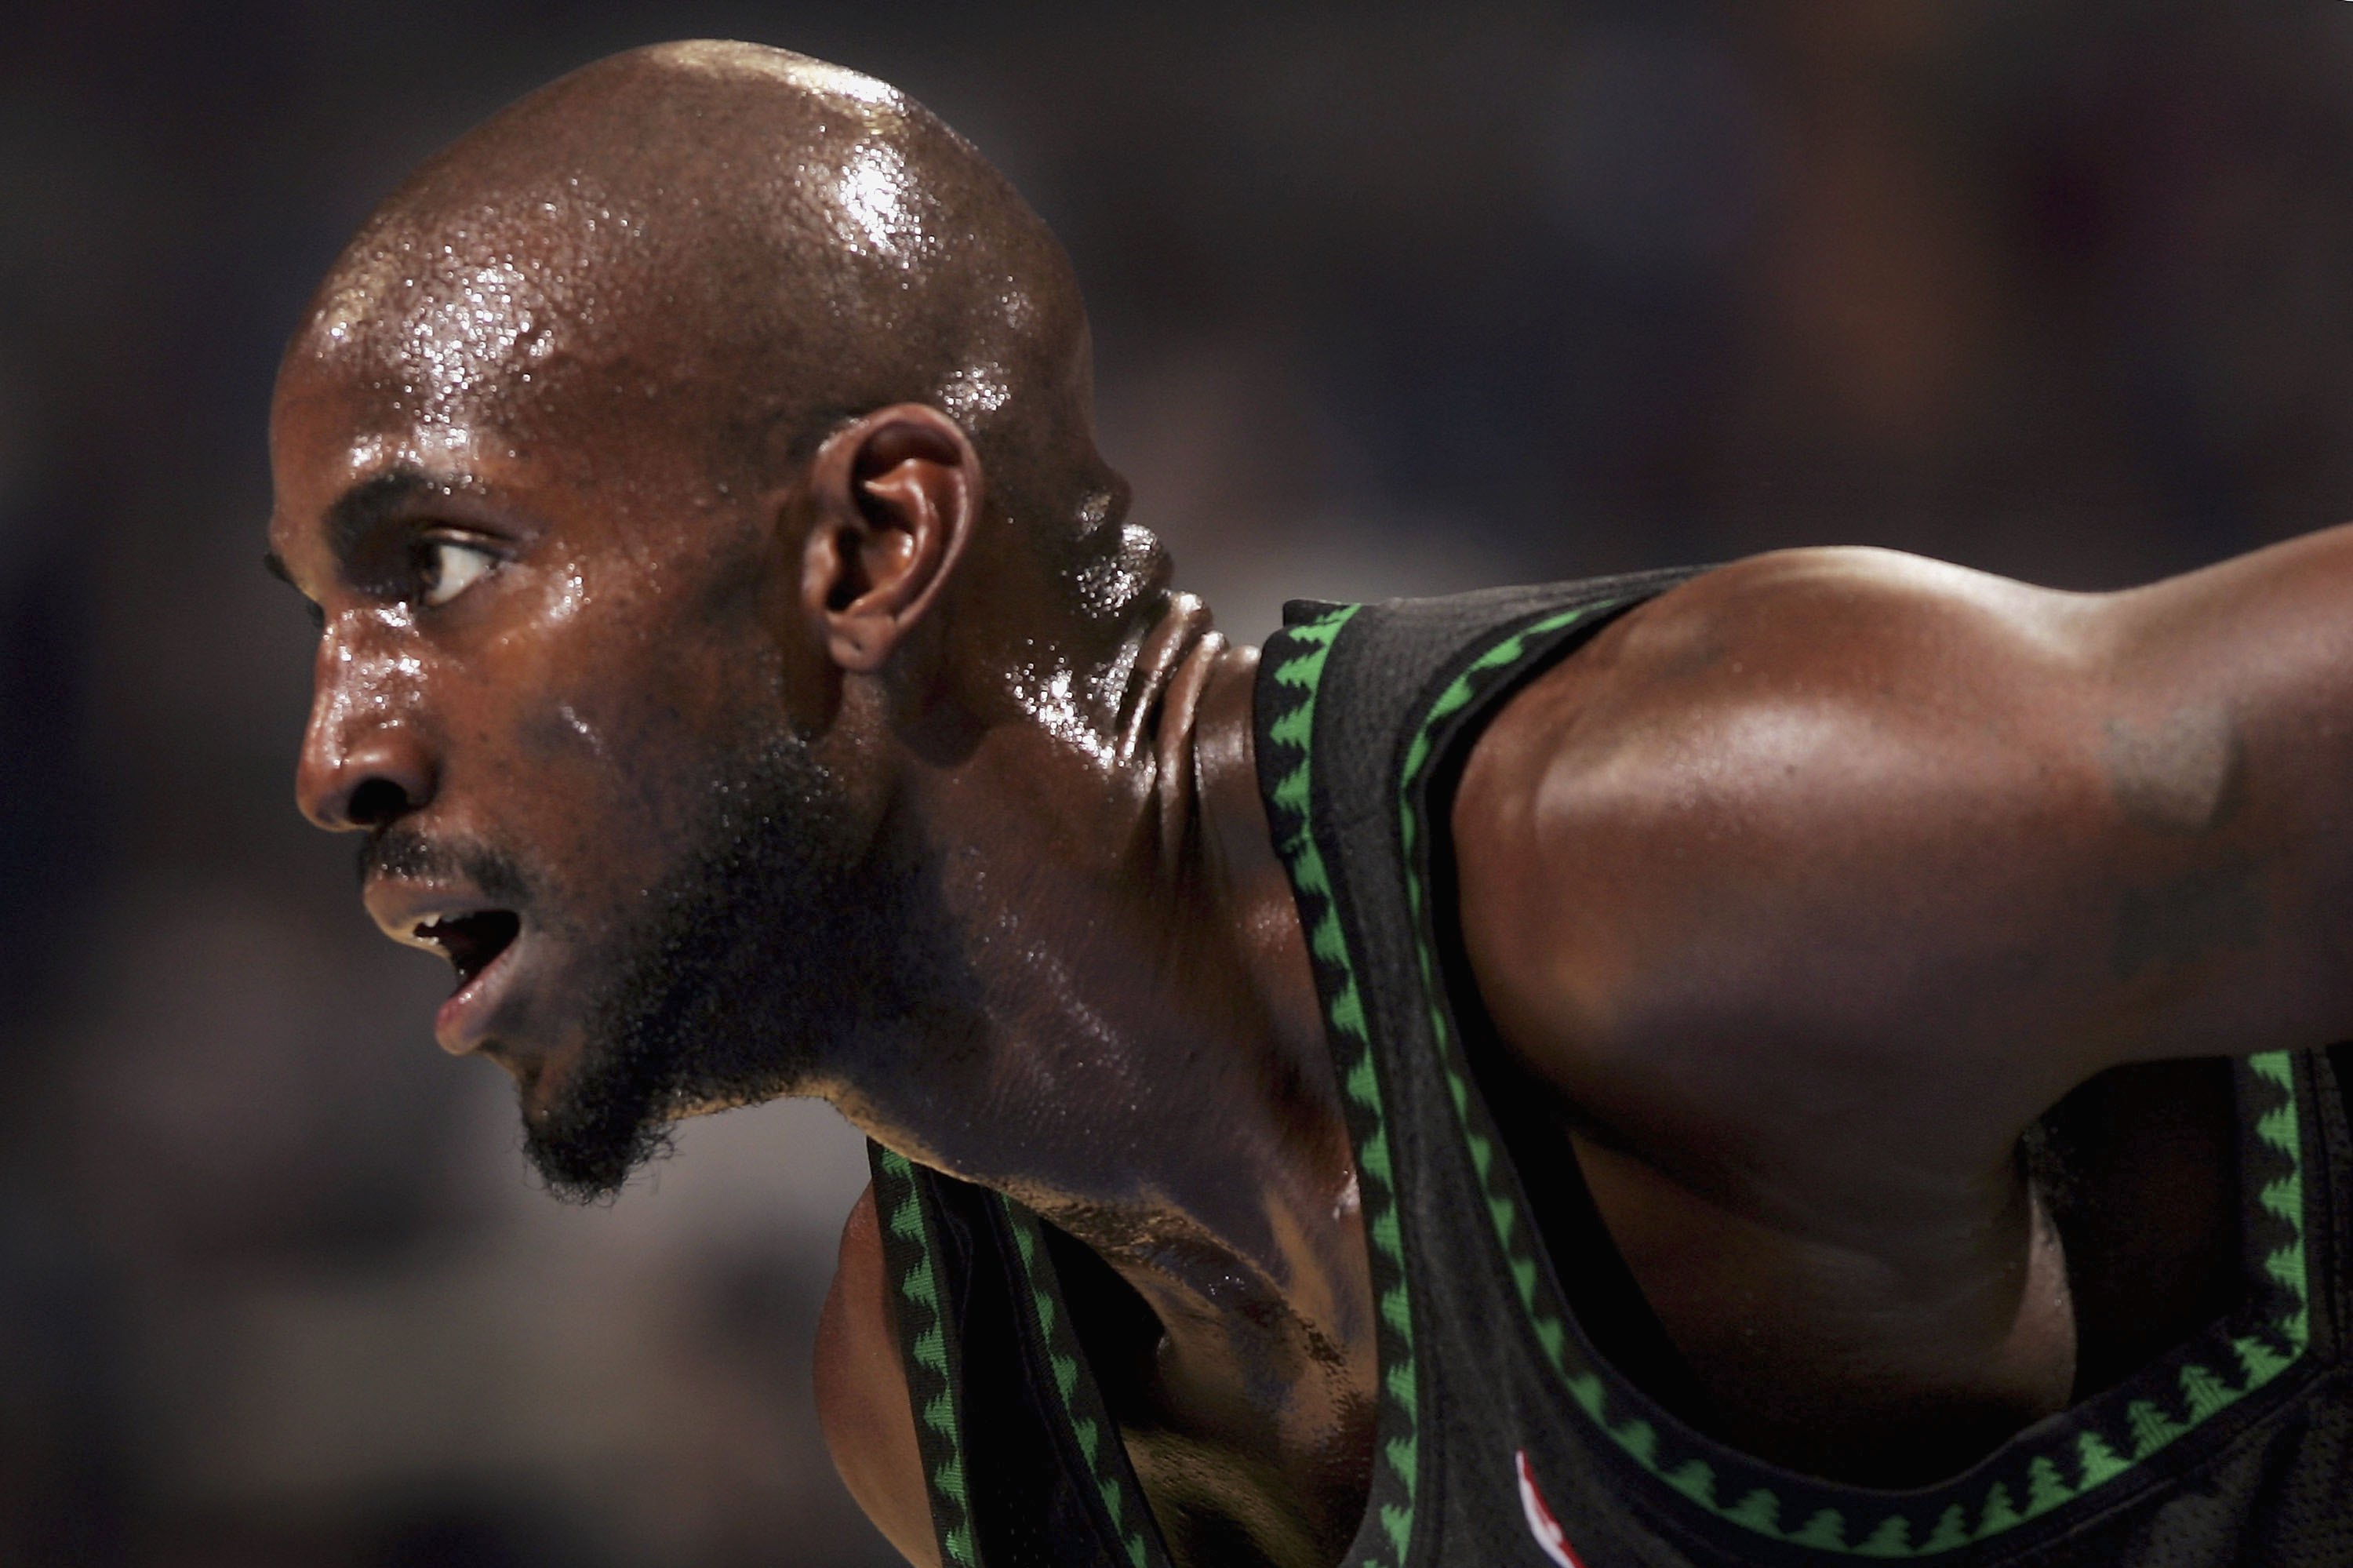 Kevin Garnett honors late teammate Malik Sealy with new number